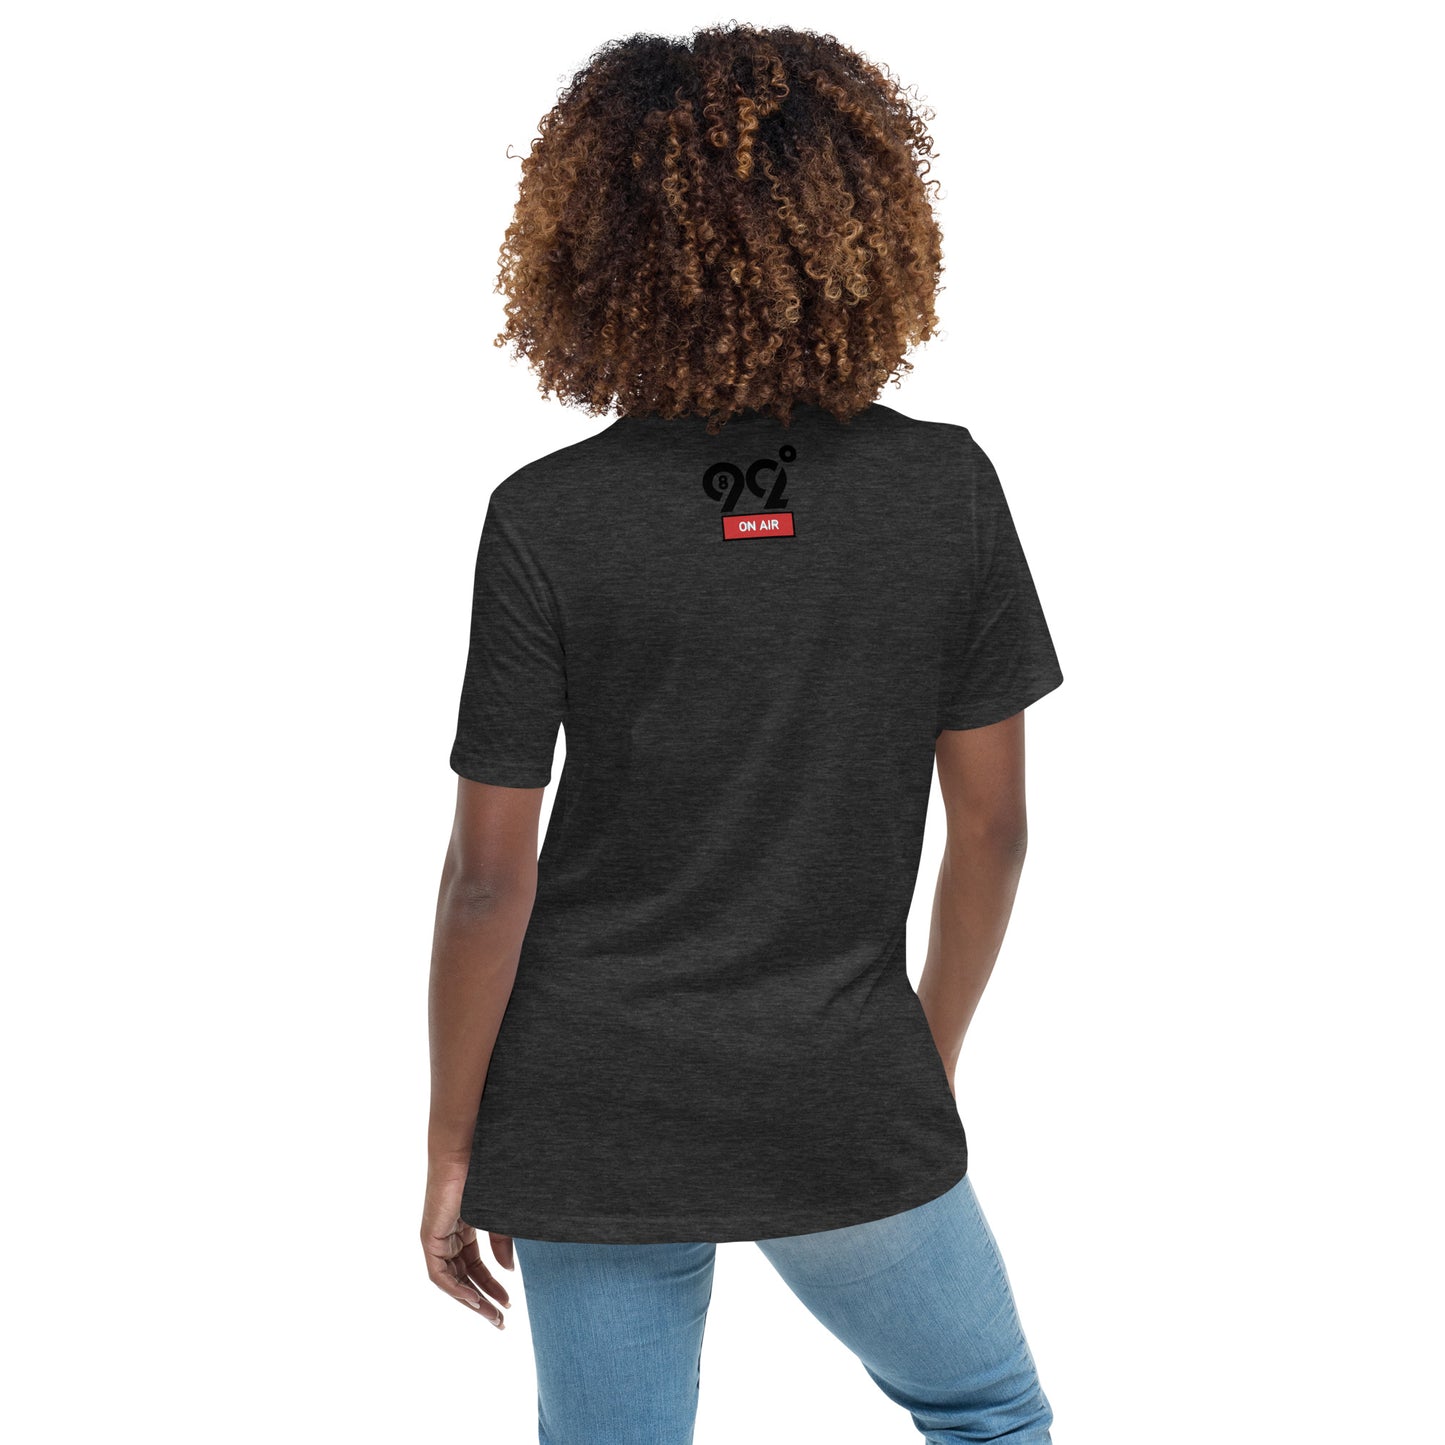 Welcome To My Home - 8MT92 Women's Relaxed T-Shirt